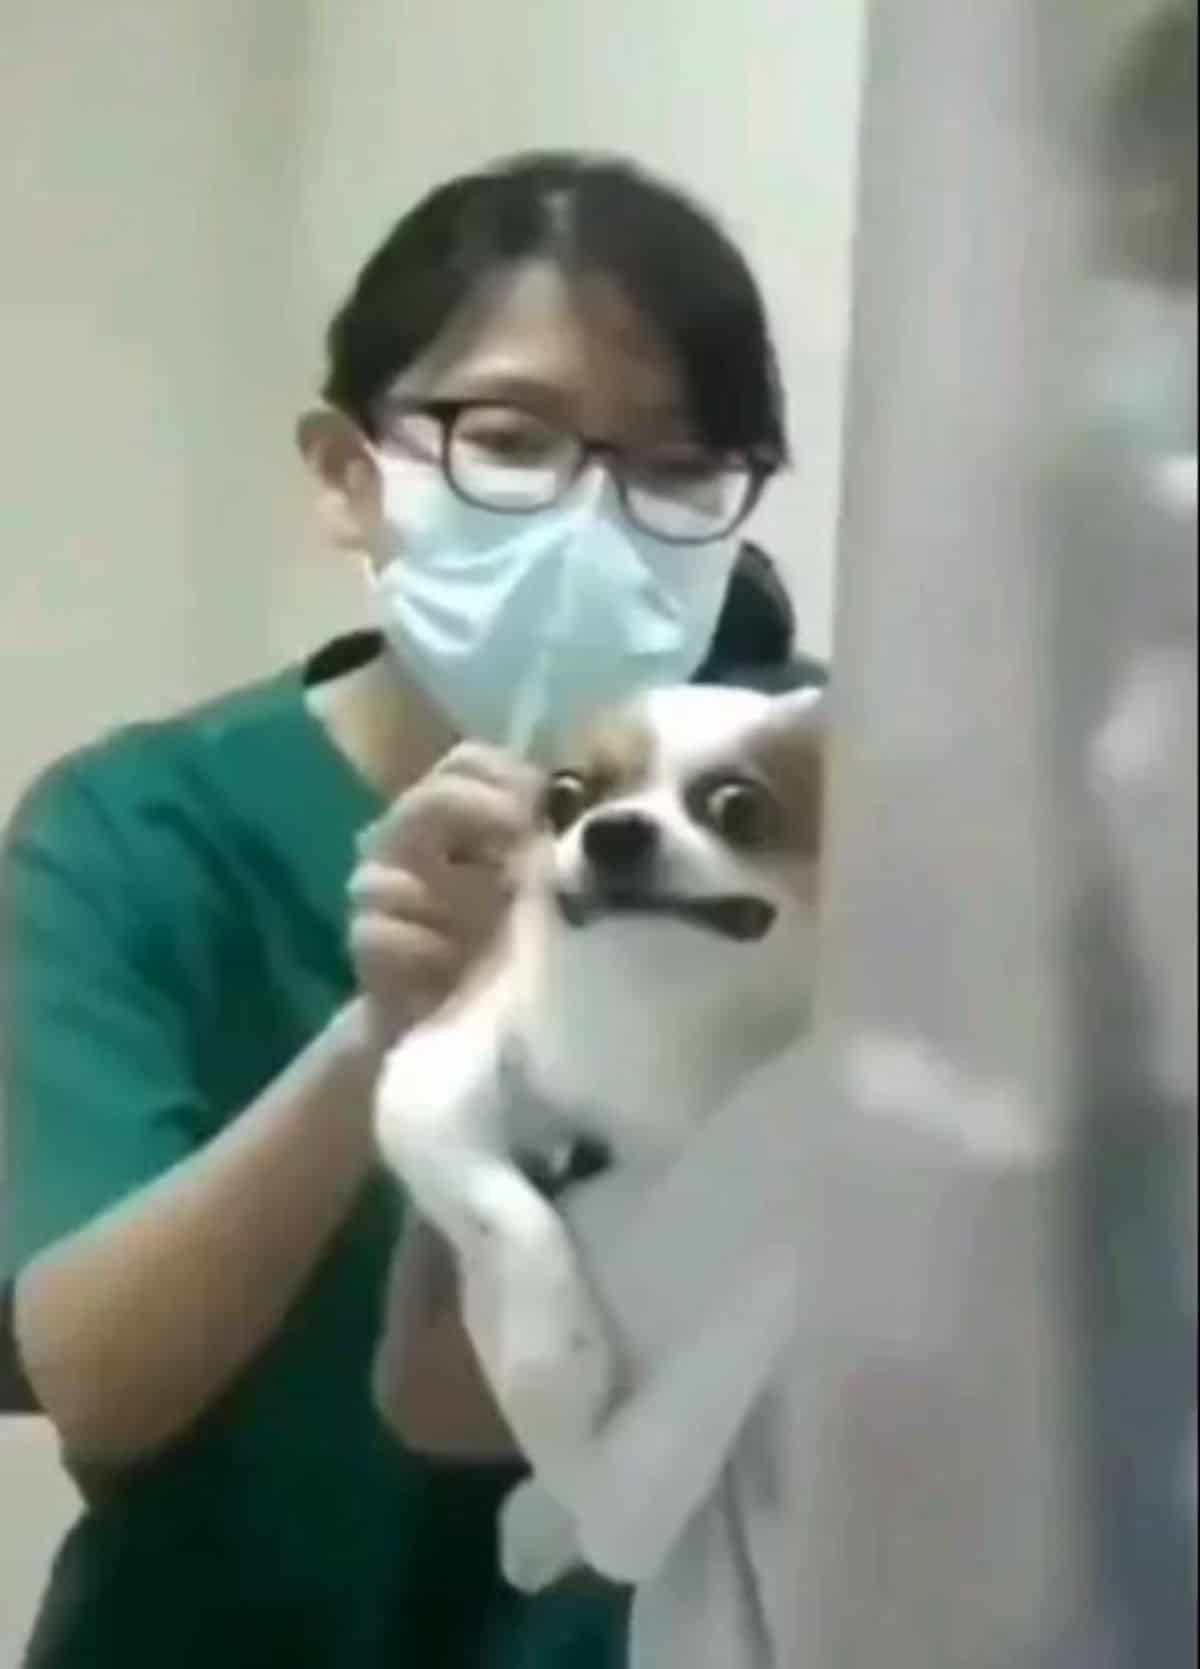 brown and white dog grimacing being held by someone and a woman in green scrubs and face mask touching the dog